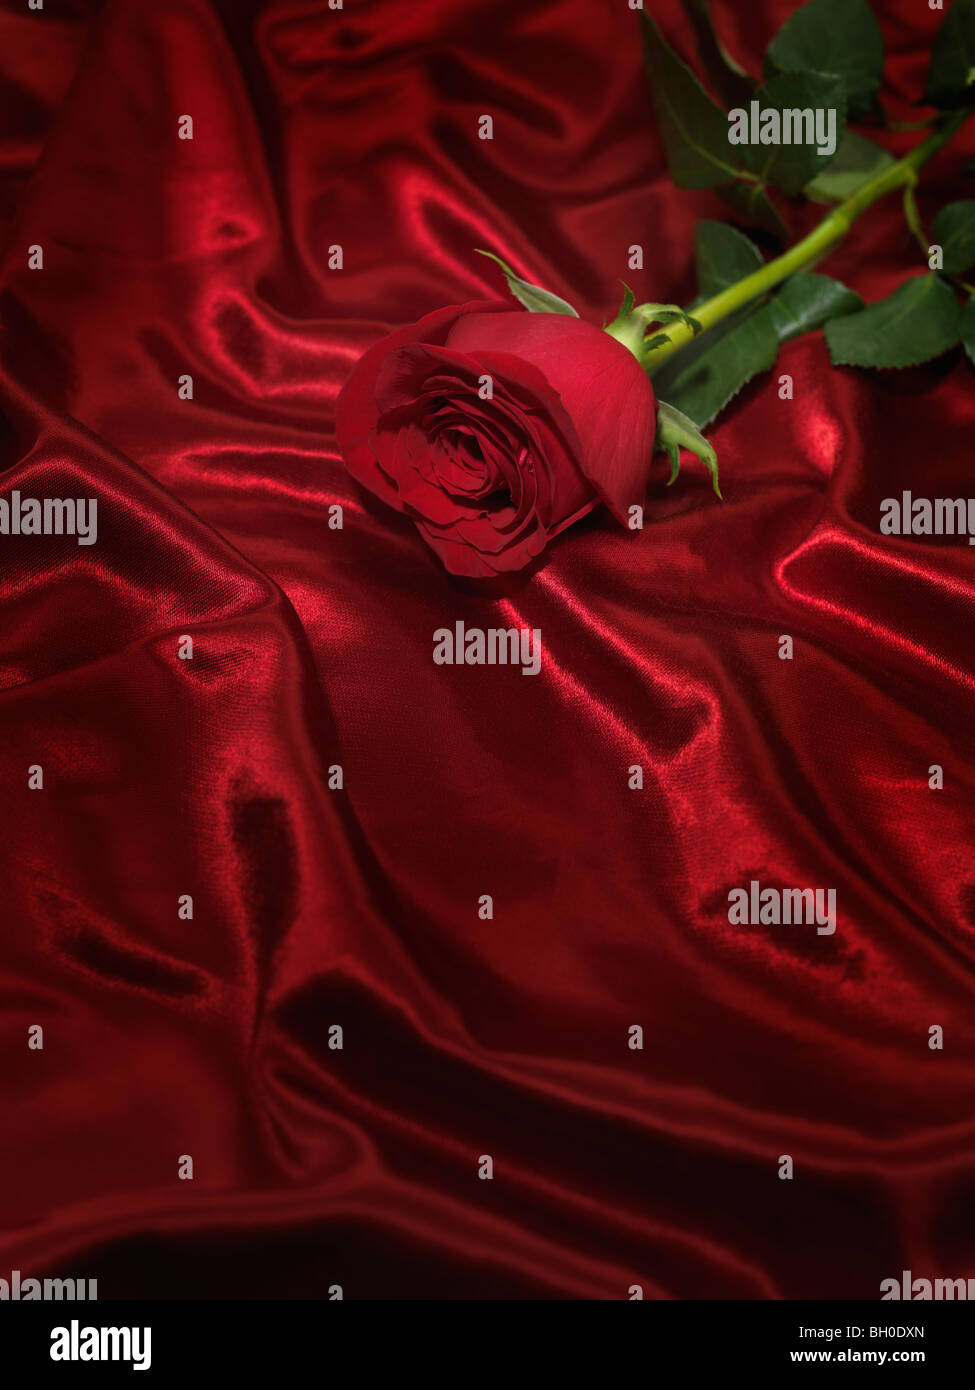 Single red rose on shiny silky fabric background Stock Photo